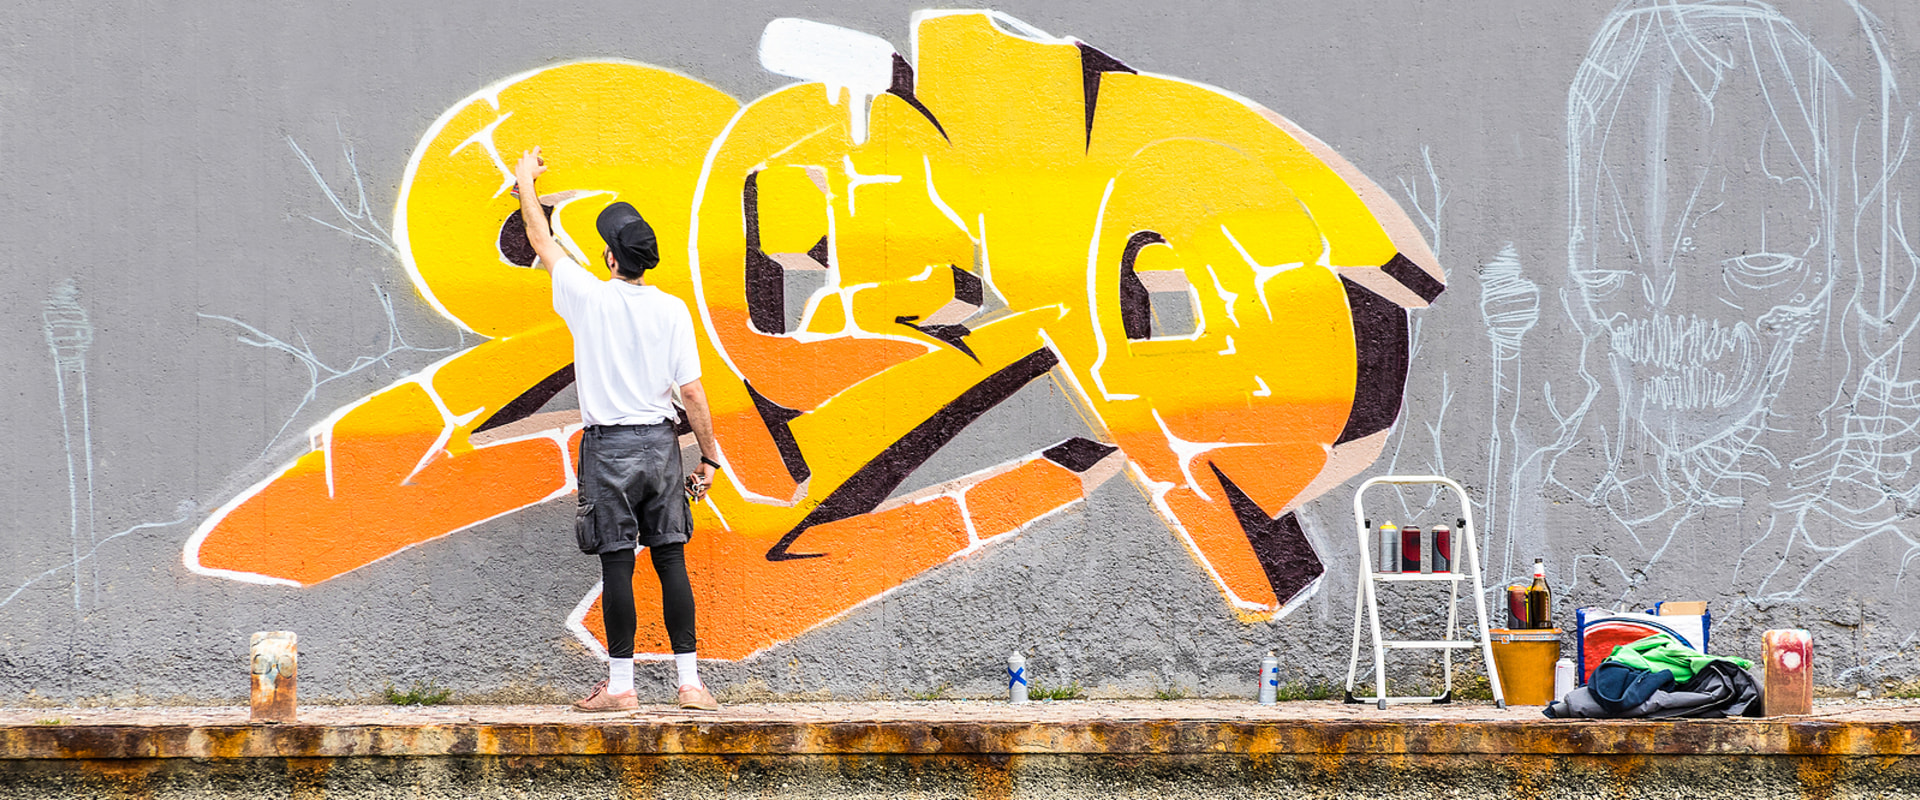 What do you think are the differences between graffiti and street arts what are their similarities?